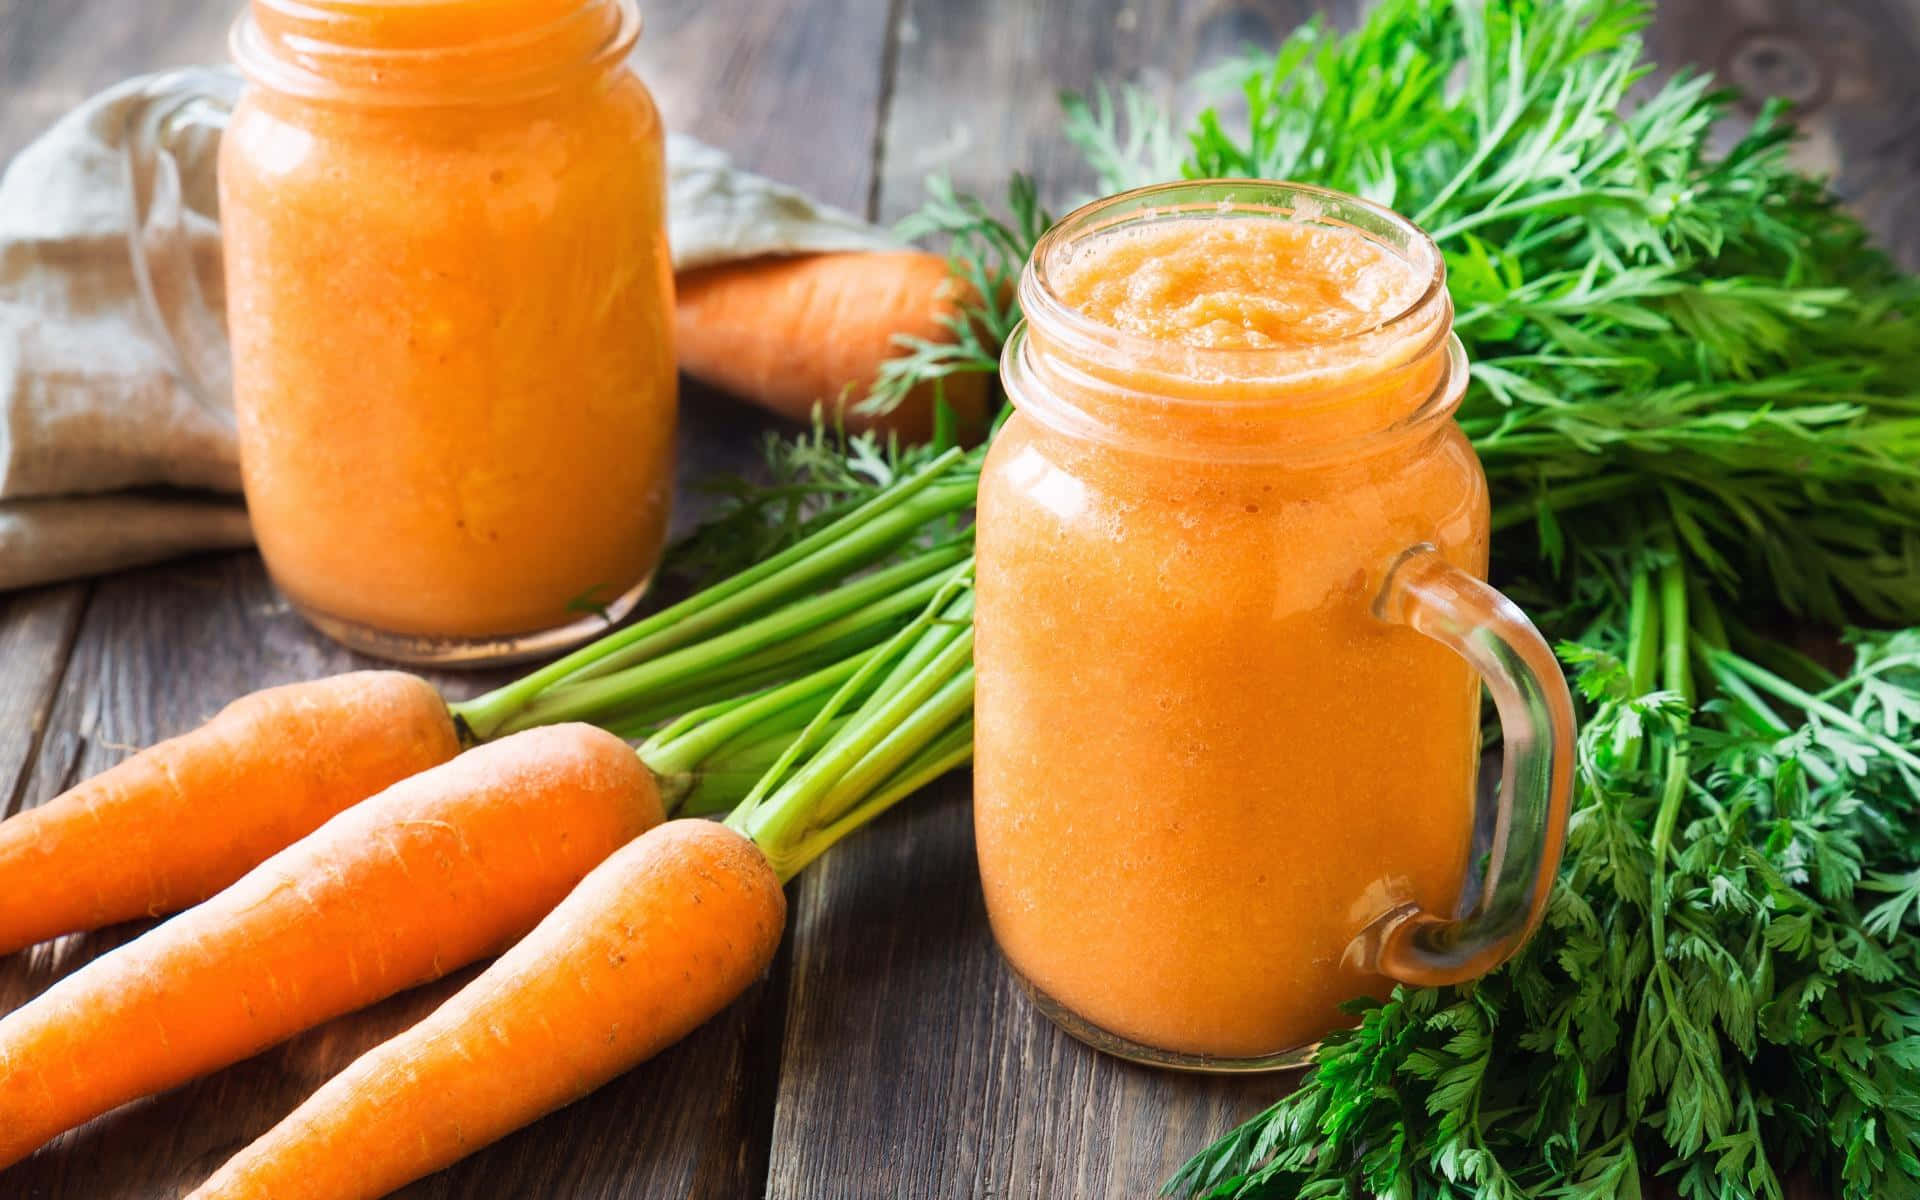 Carrot Juice In Jars On A Wooden Table